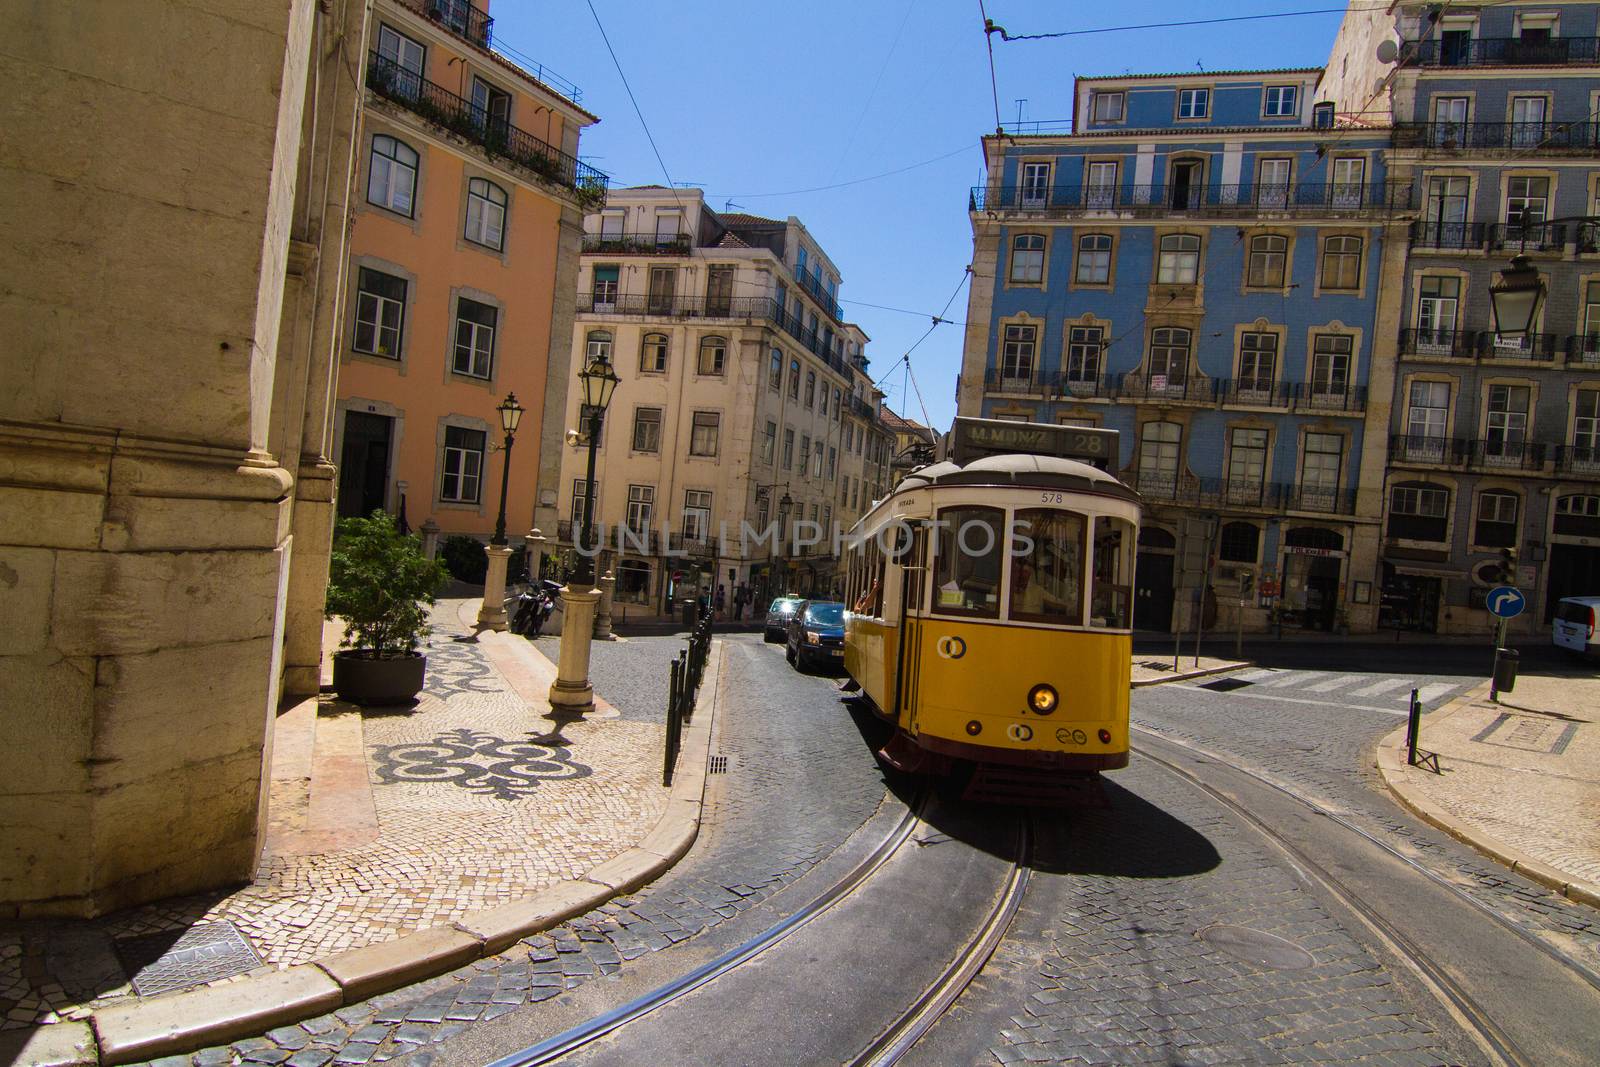 The streets of Lisbon in Portugal